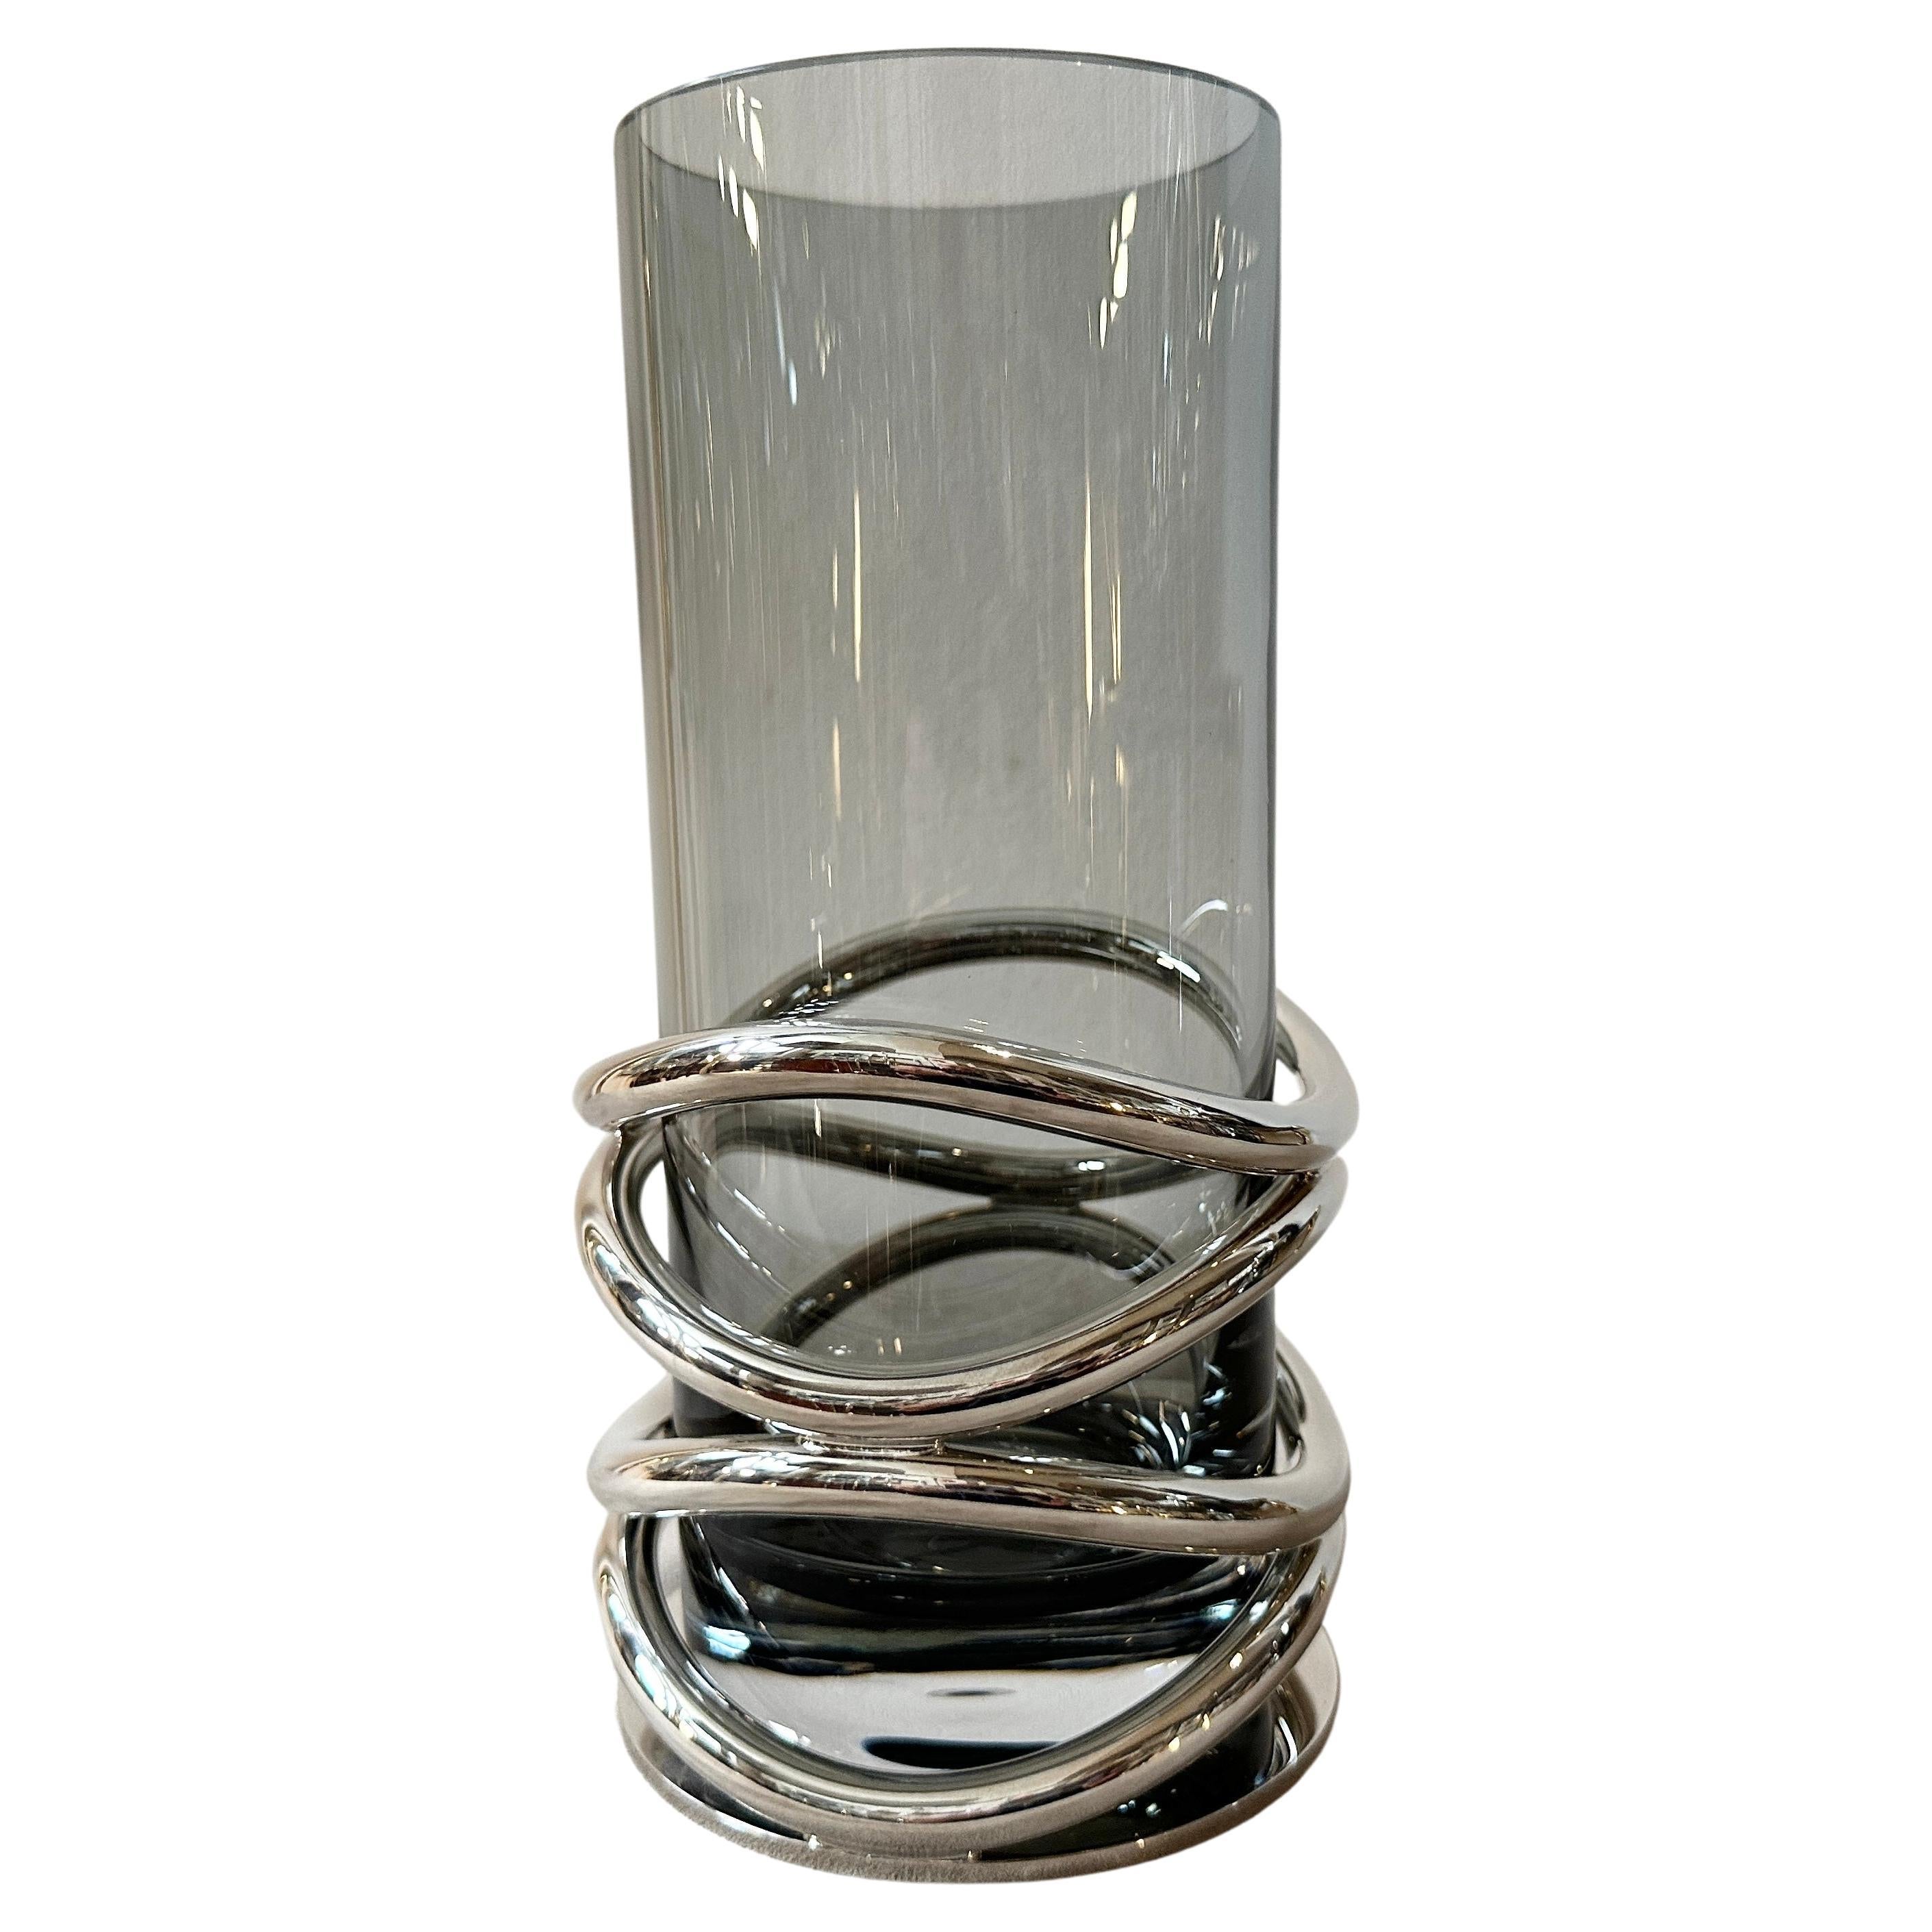 1990s Modernist Silver Plated and Smoked Glass Thomas French Vase by Christofle For Sale